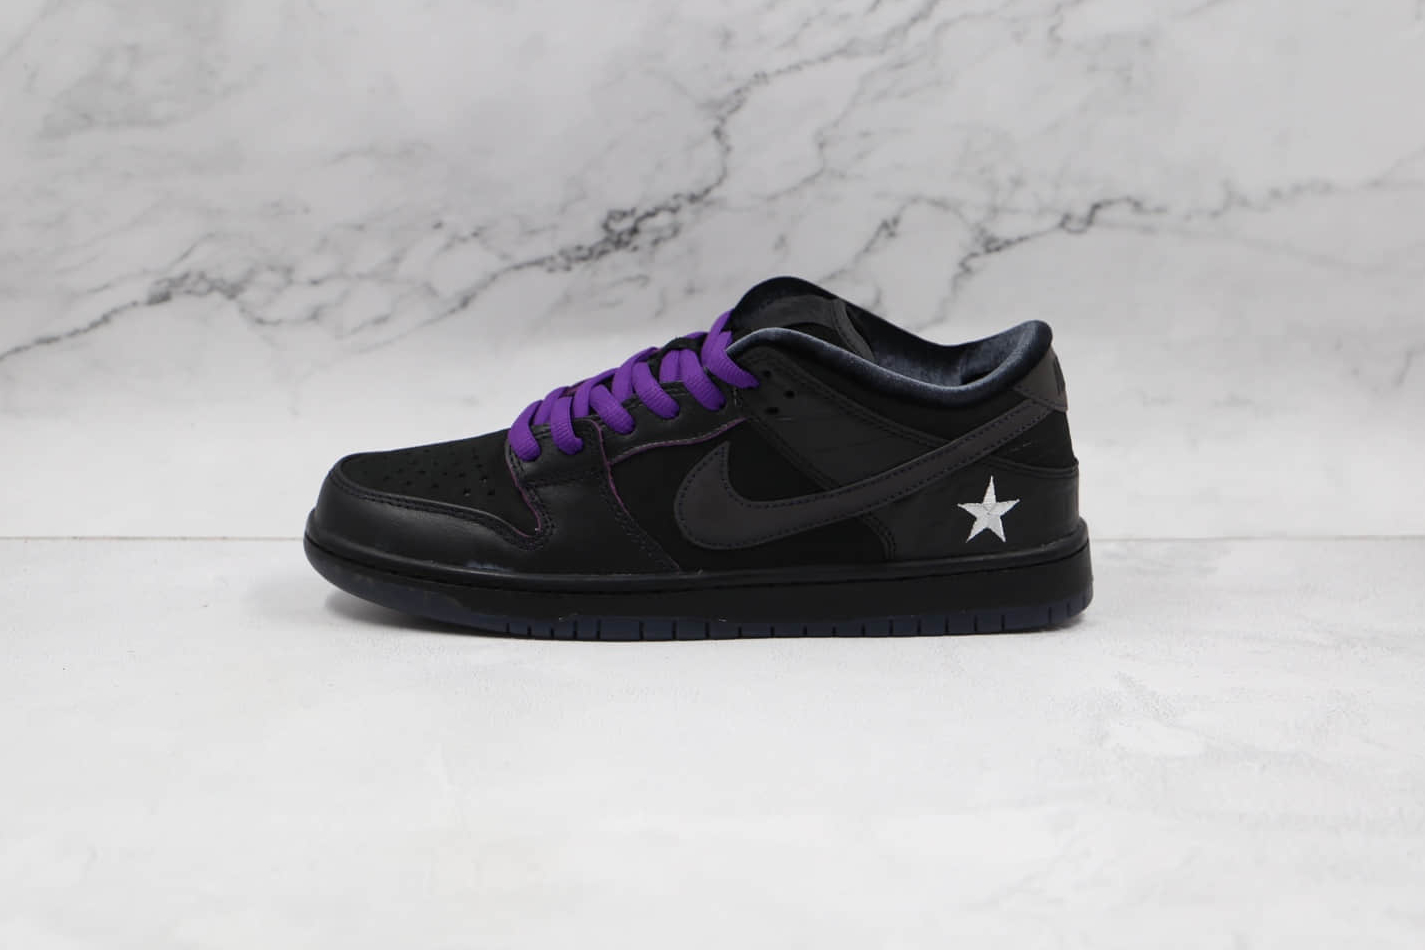 Nike Familia x Dunk Low Pro QS SB 'First Avenue' DJ1159-001 - Limited Edition Dunk Low Pro Sneakers for Sale!